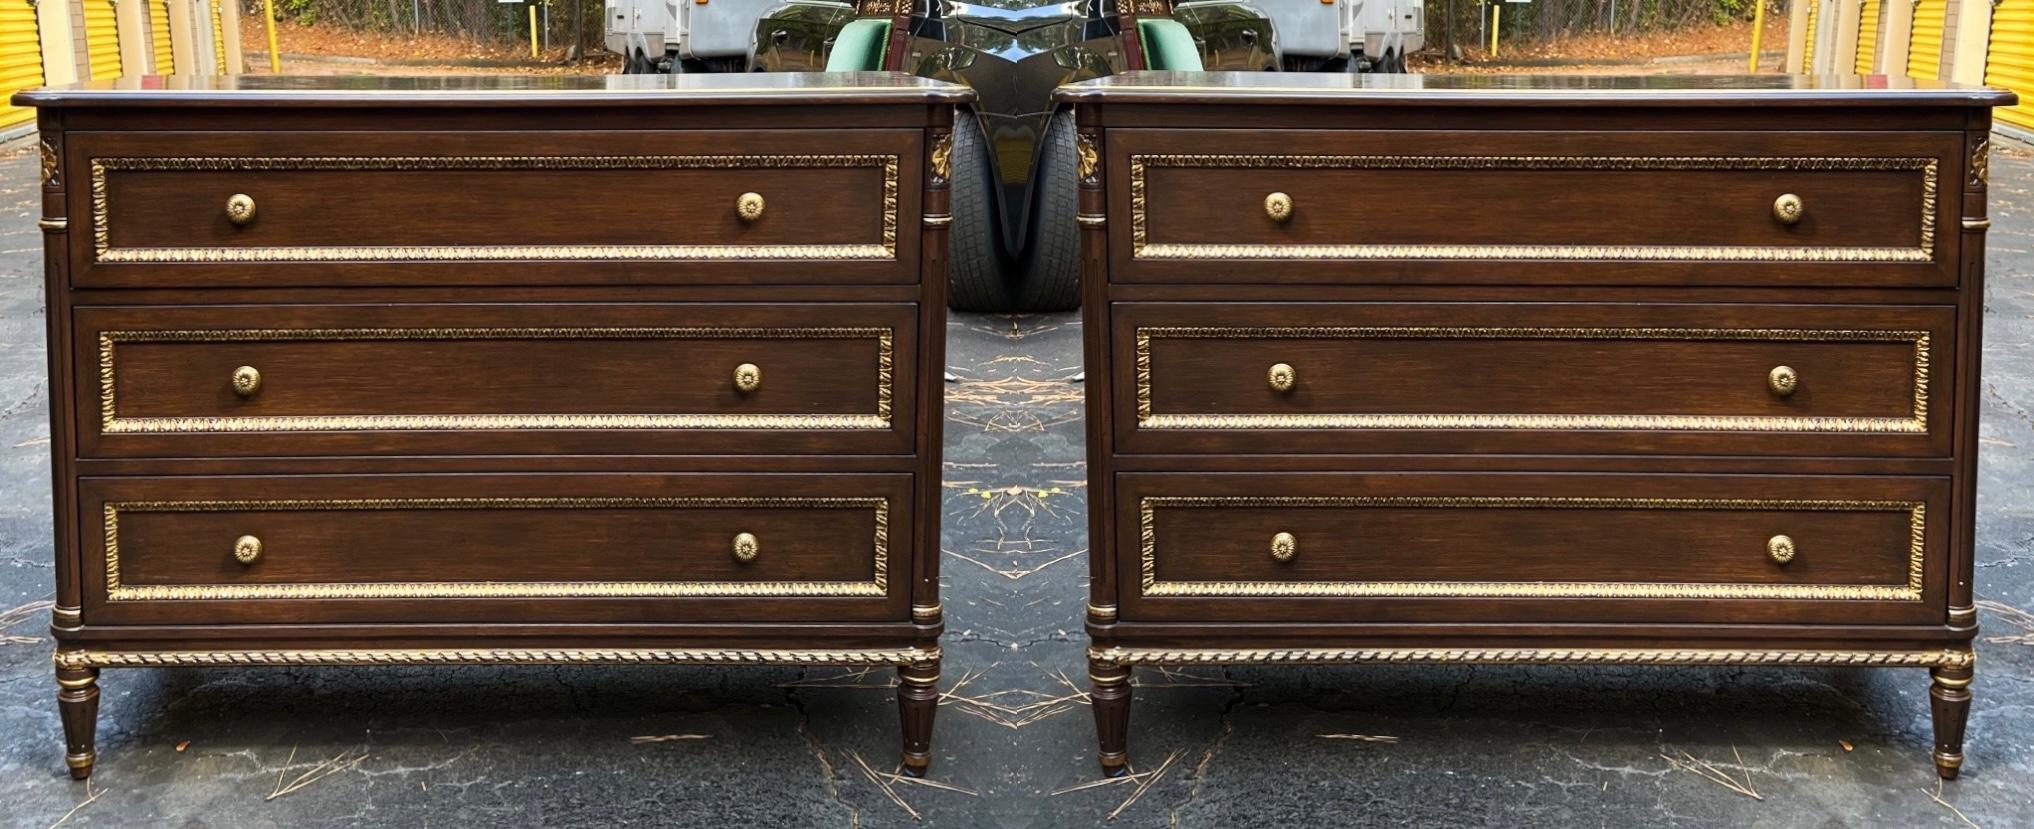 20th-C. French Louis XVI Style Cherry with Gilt Accents Chests / Commodes, Pair 1